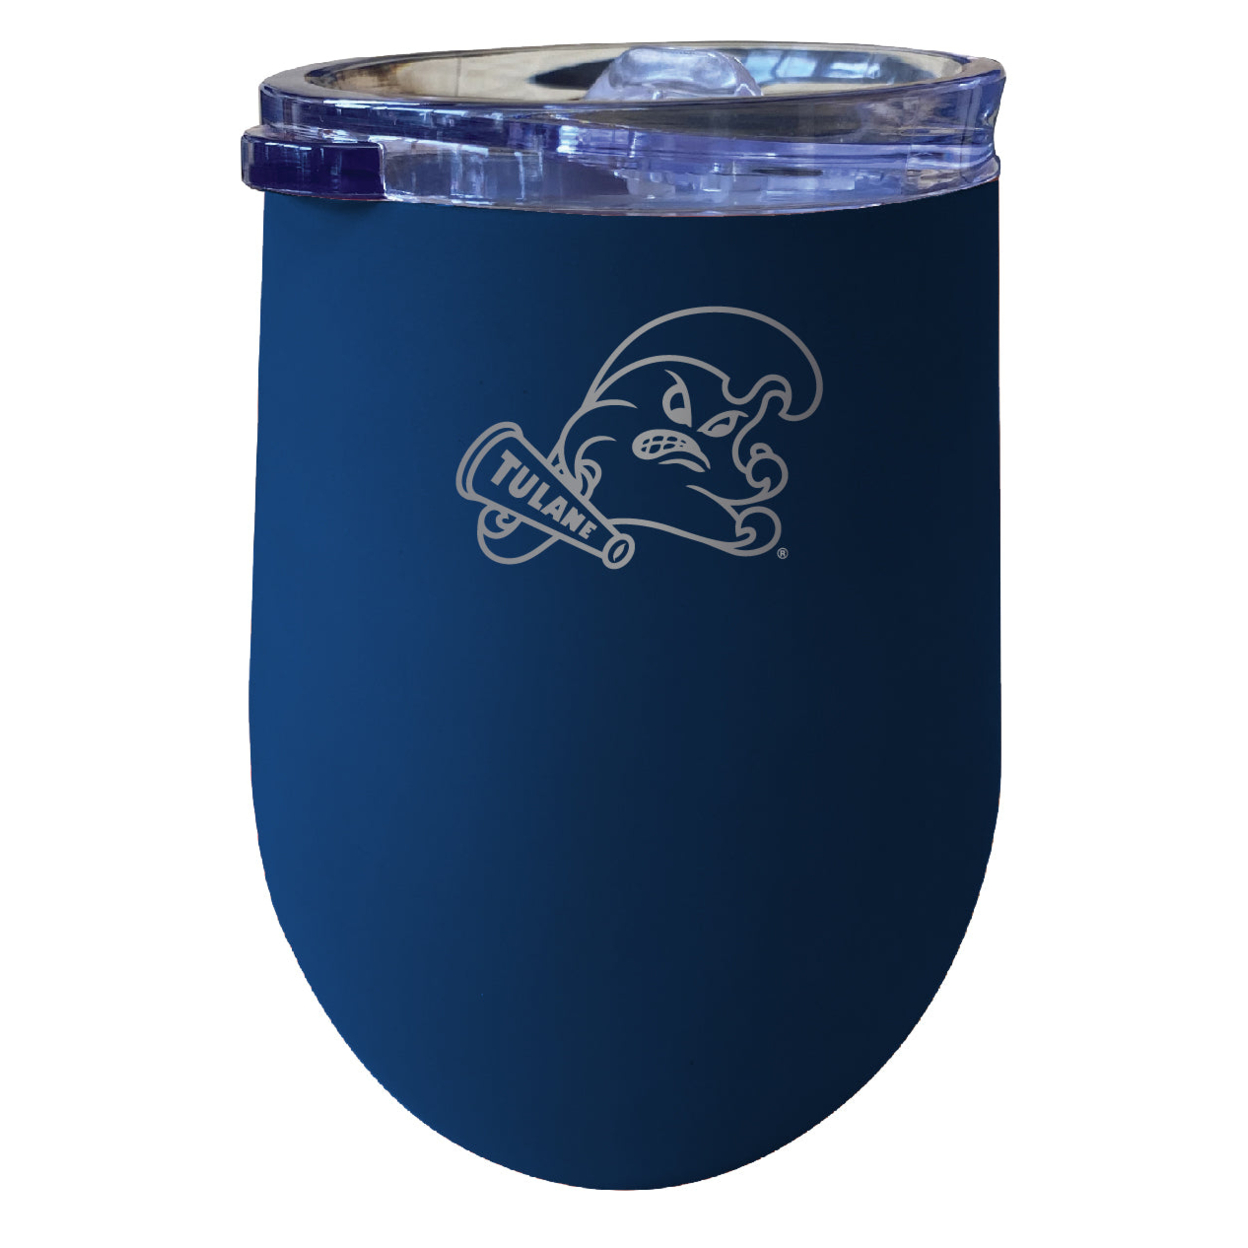 Tulane University Green Wave 12 Oz Etched Insulated Wine Stainless Steel Tumbler - Choose Your Color - Navy